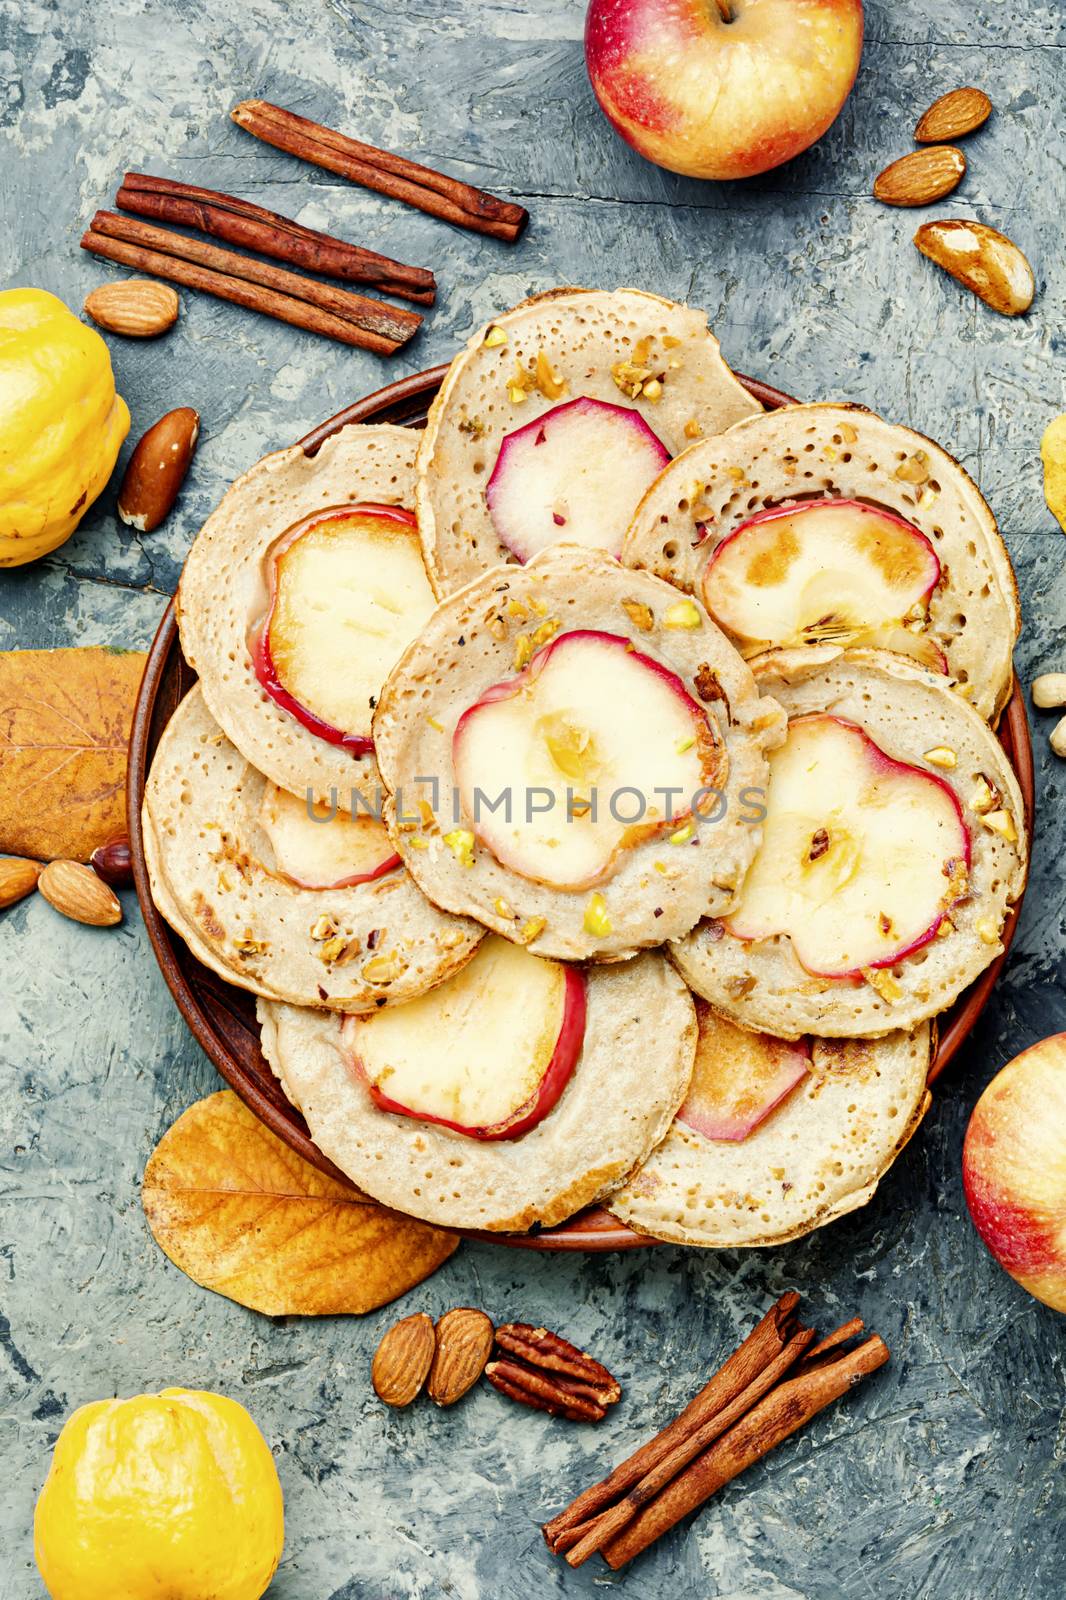 Homemade fried pancakes stuffed with apples.Autumn food